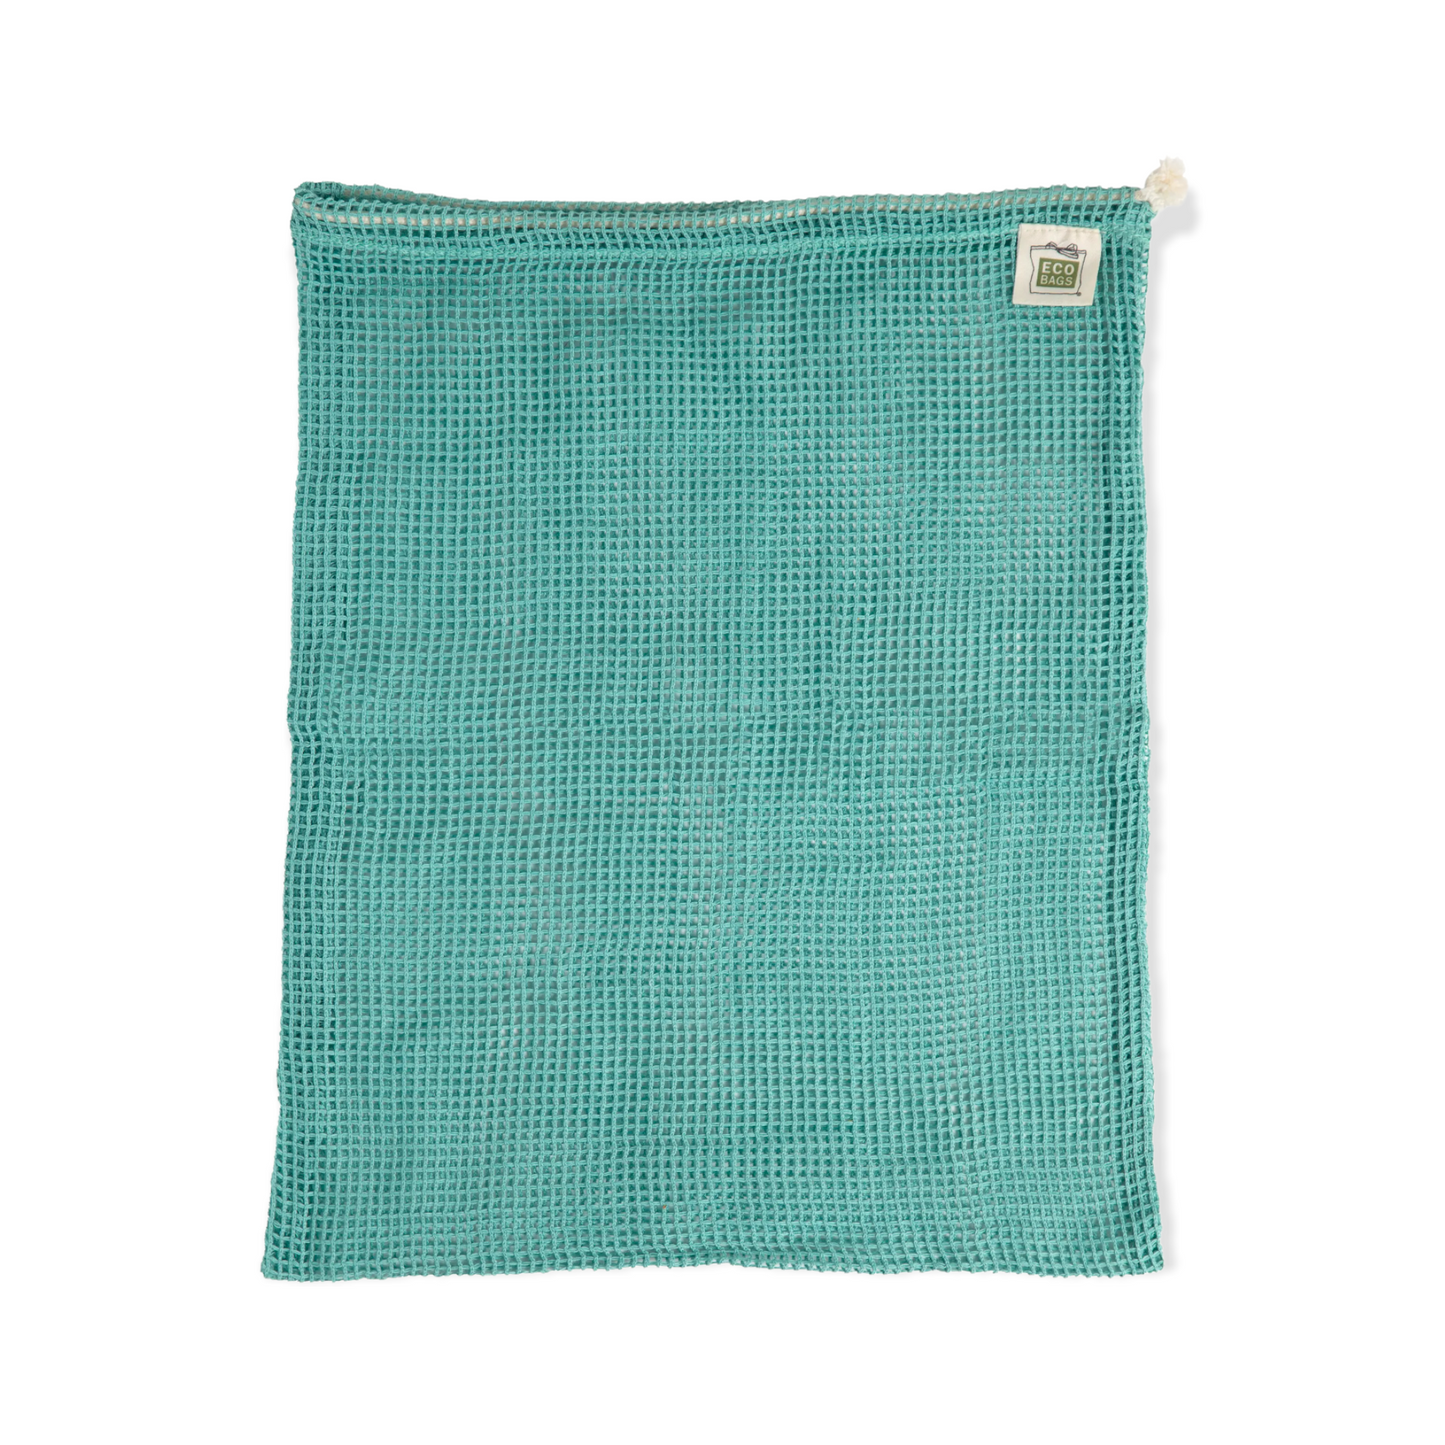 Cotton Mesh Produce Bags - Teal